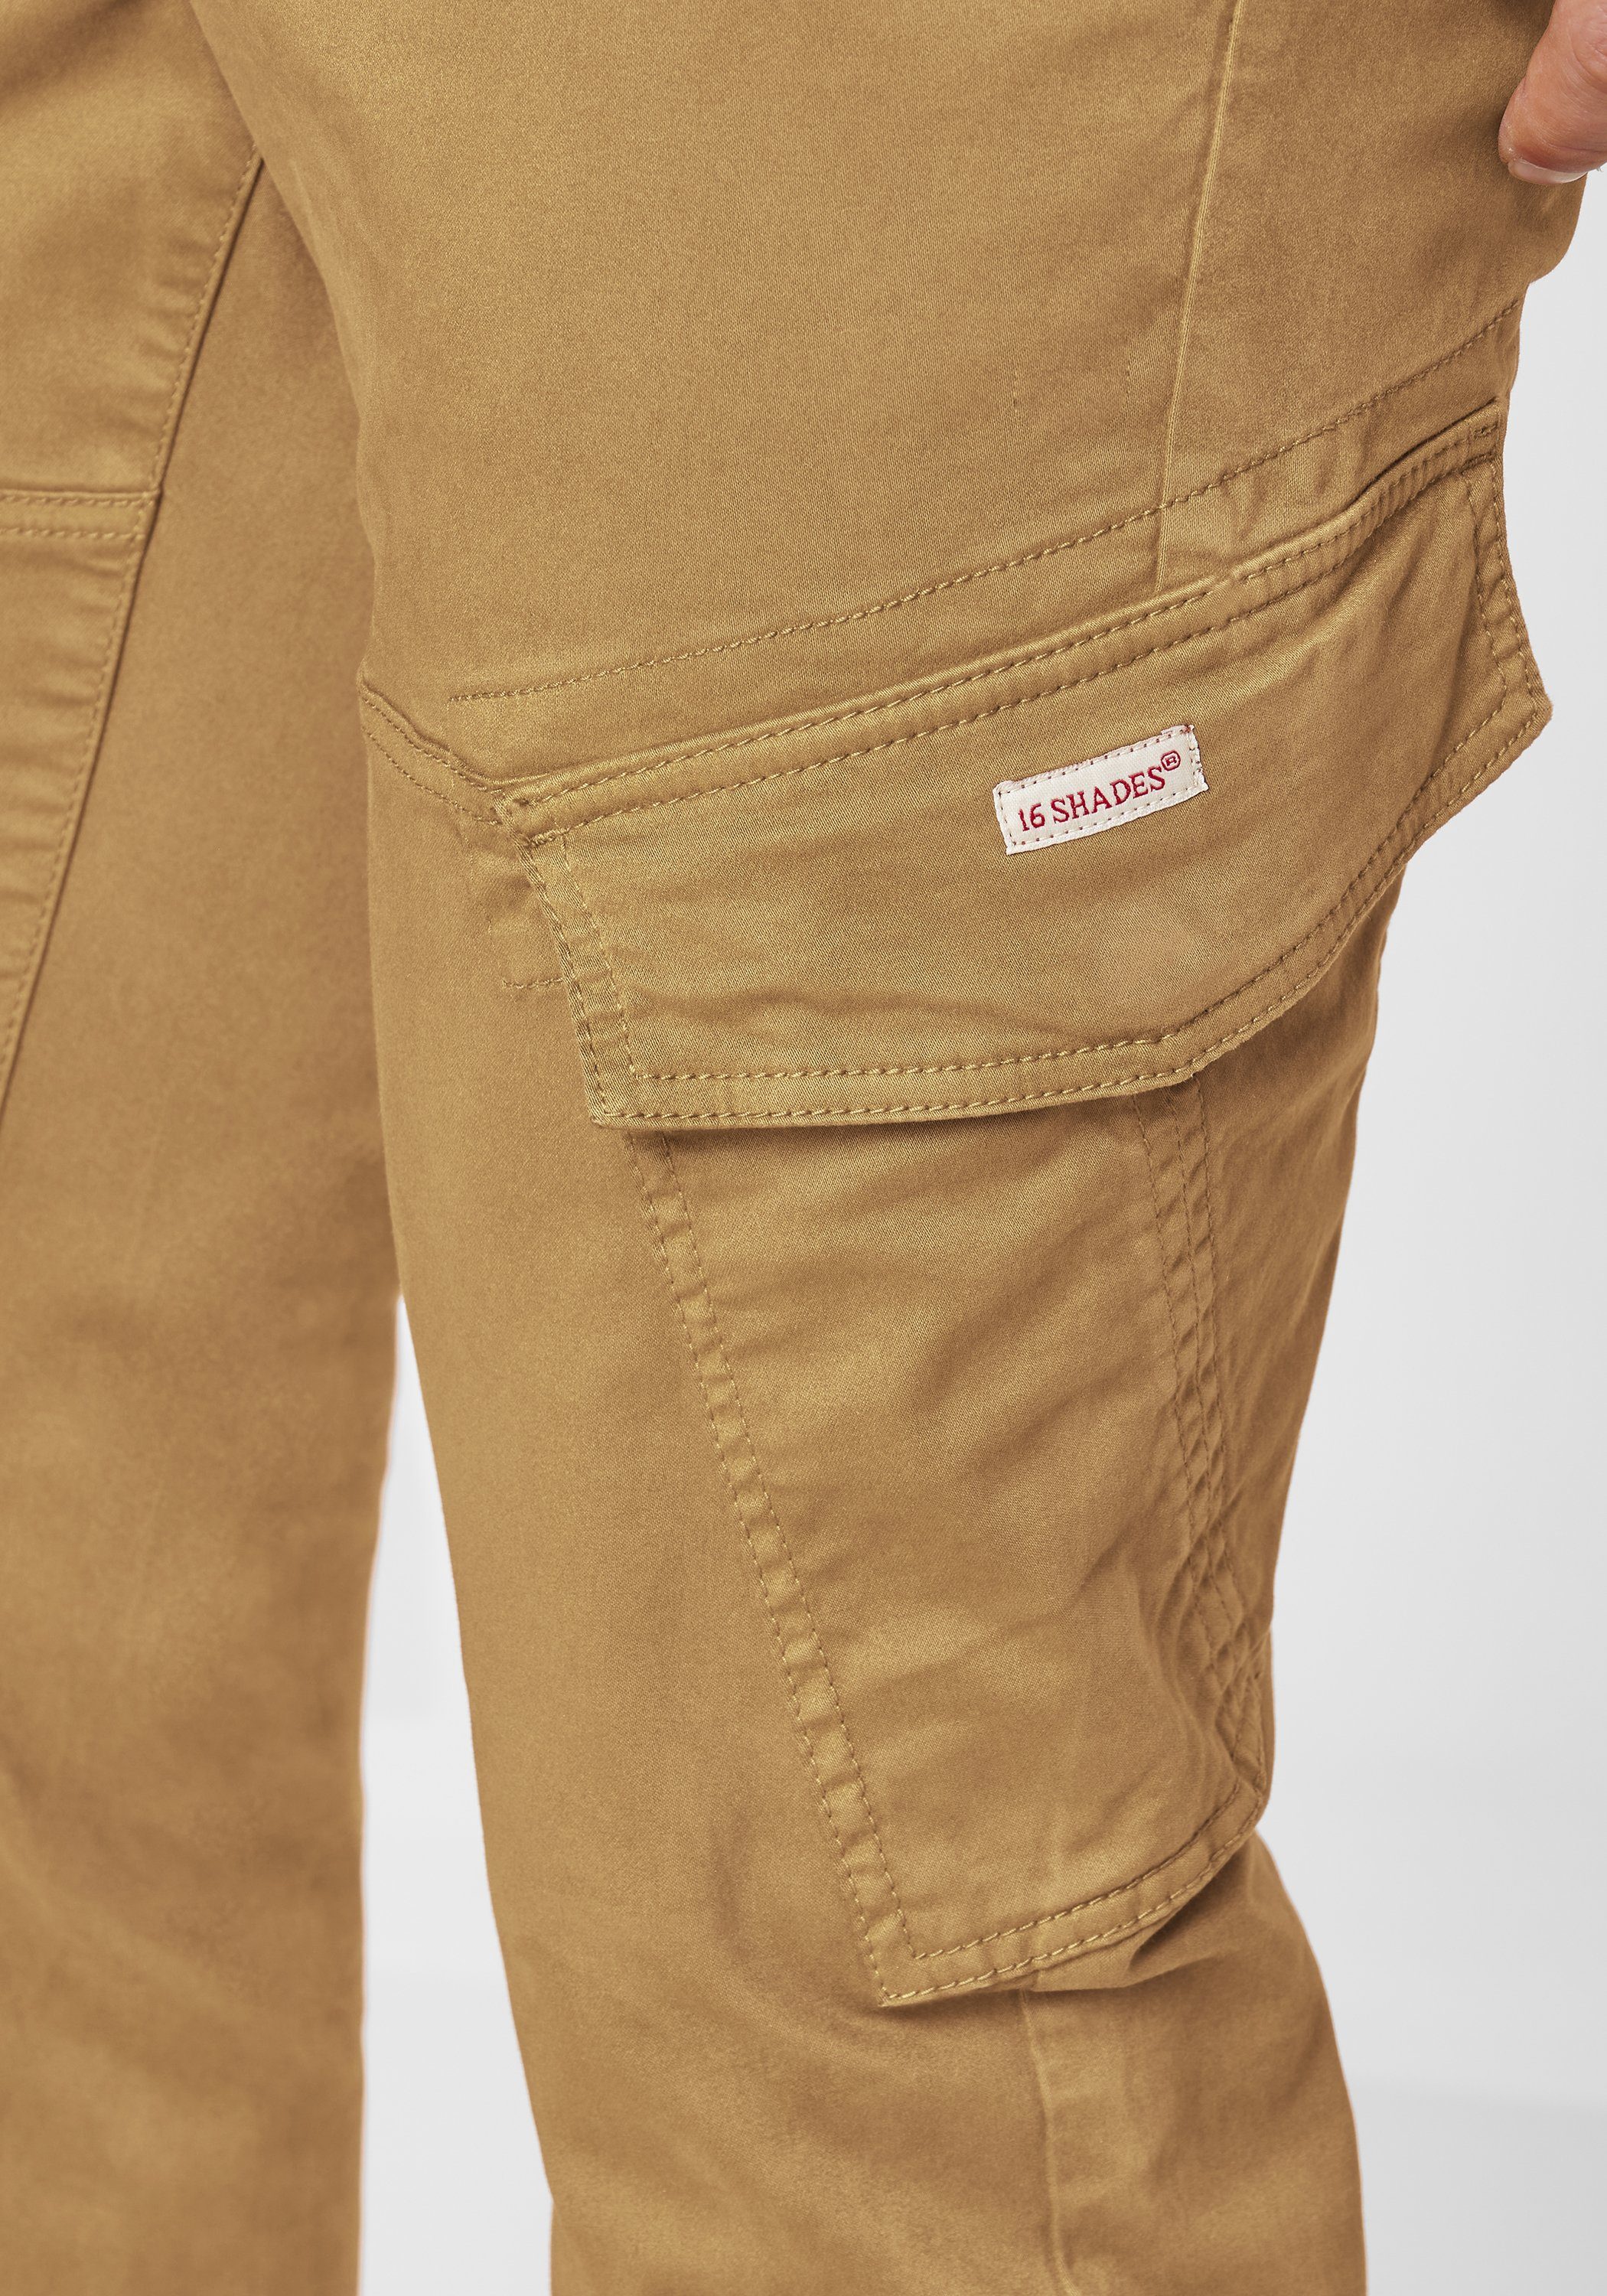 Tapered Redpoint Kingston Shades 16 Fit Chinohose- camel Edition Cargohose